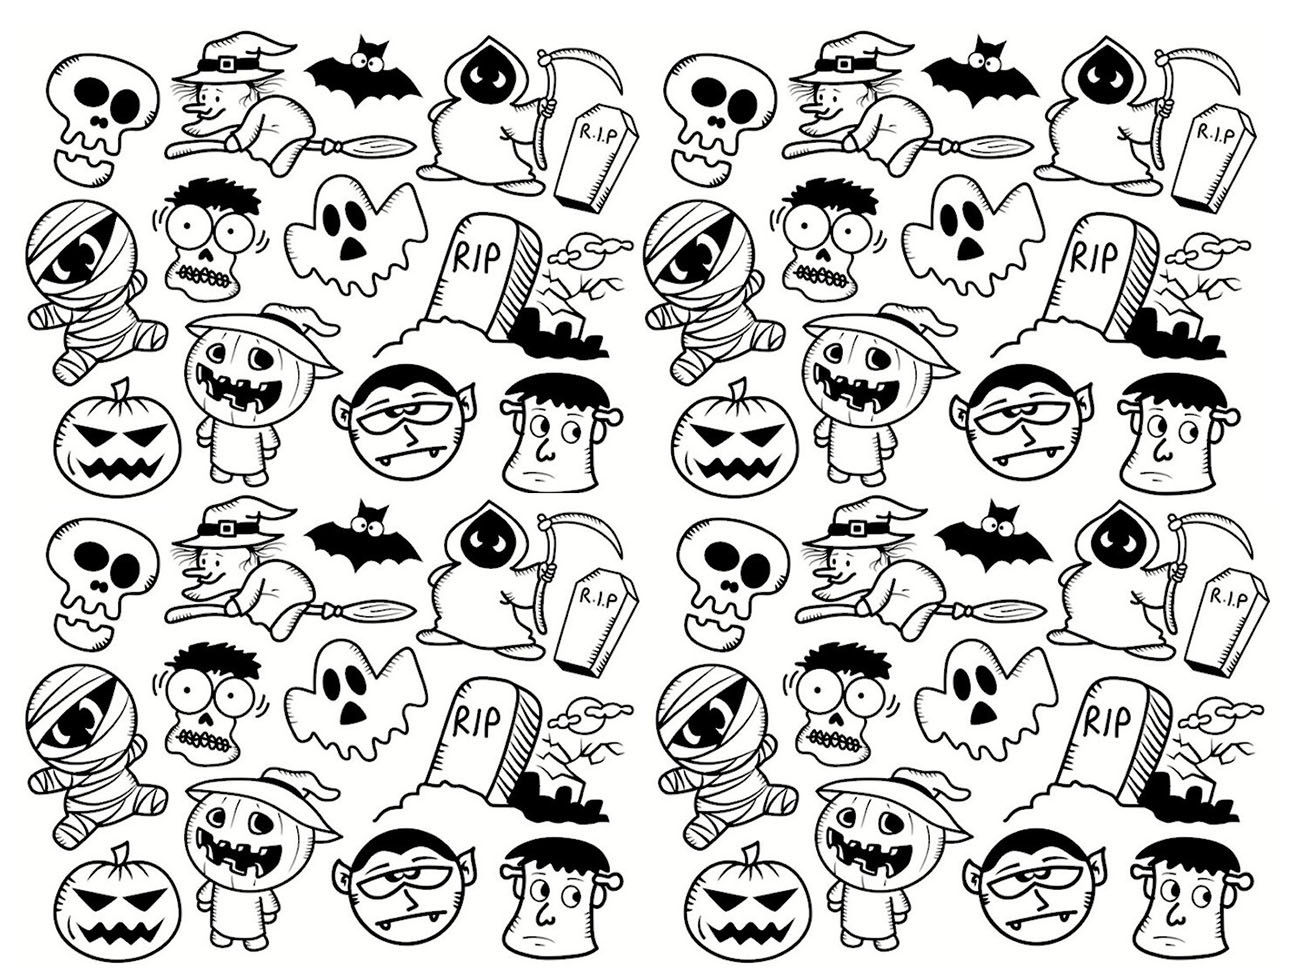 Fun Halloween coloring pages to print and color